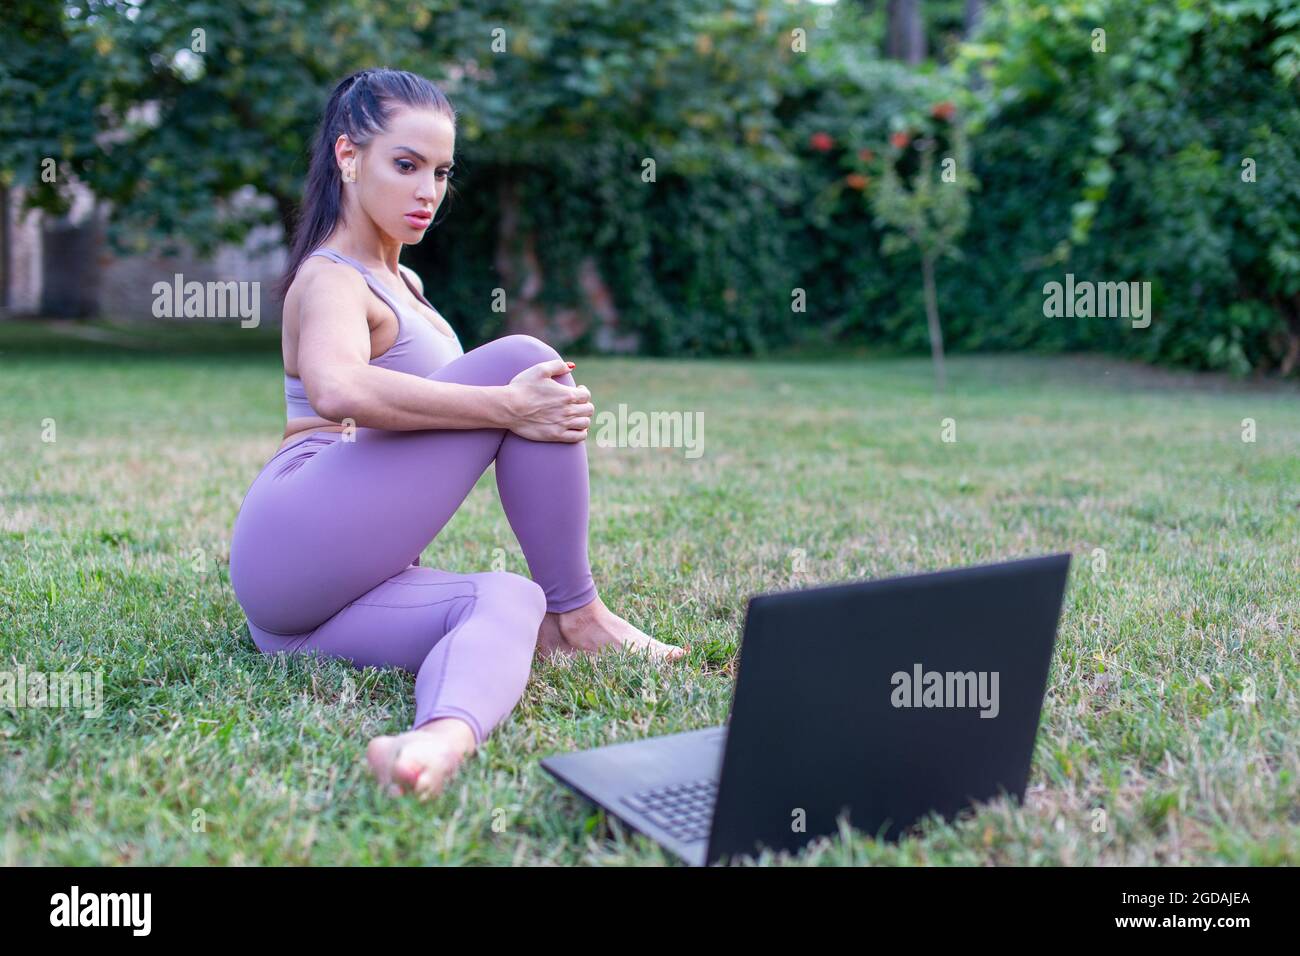 Young woman learning sitting yoga pose from tutorial video on laptop in garden Stock Photo